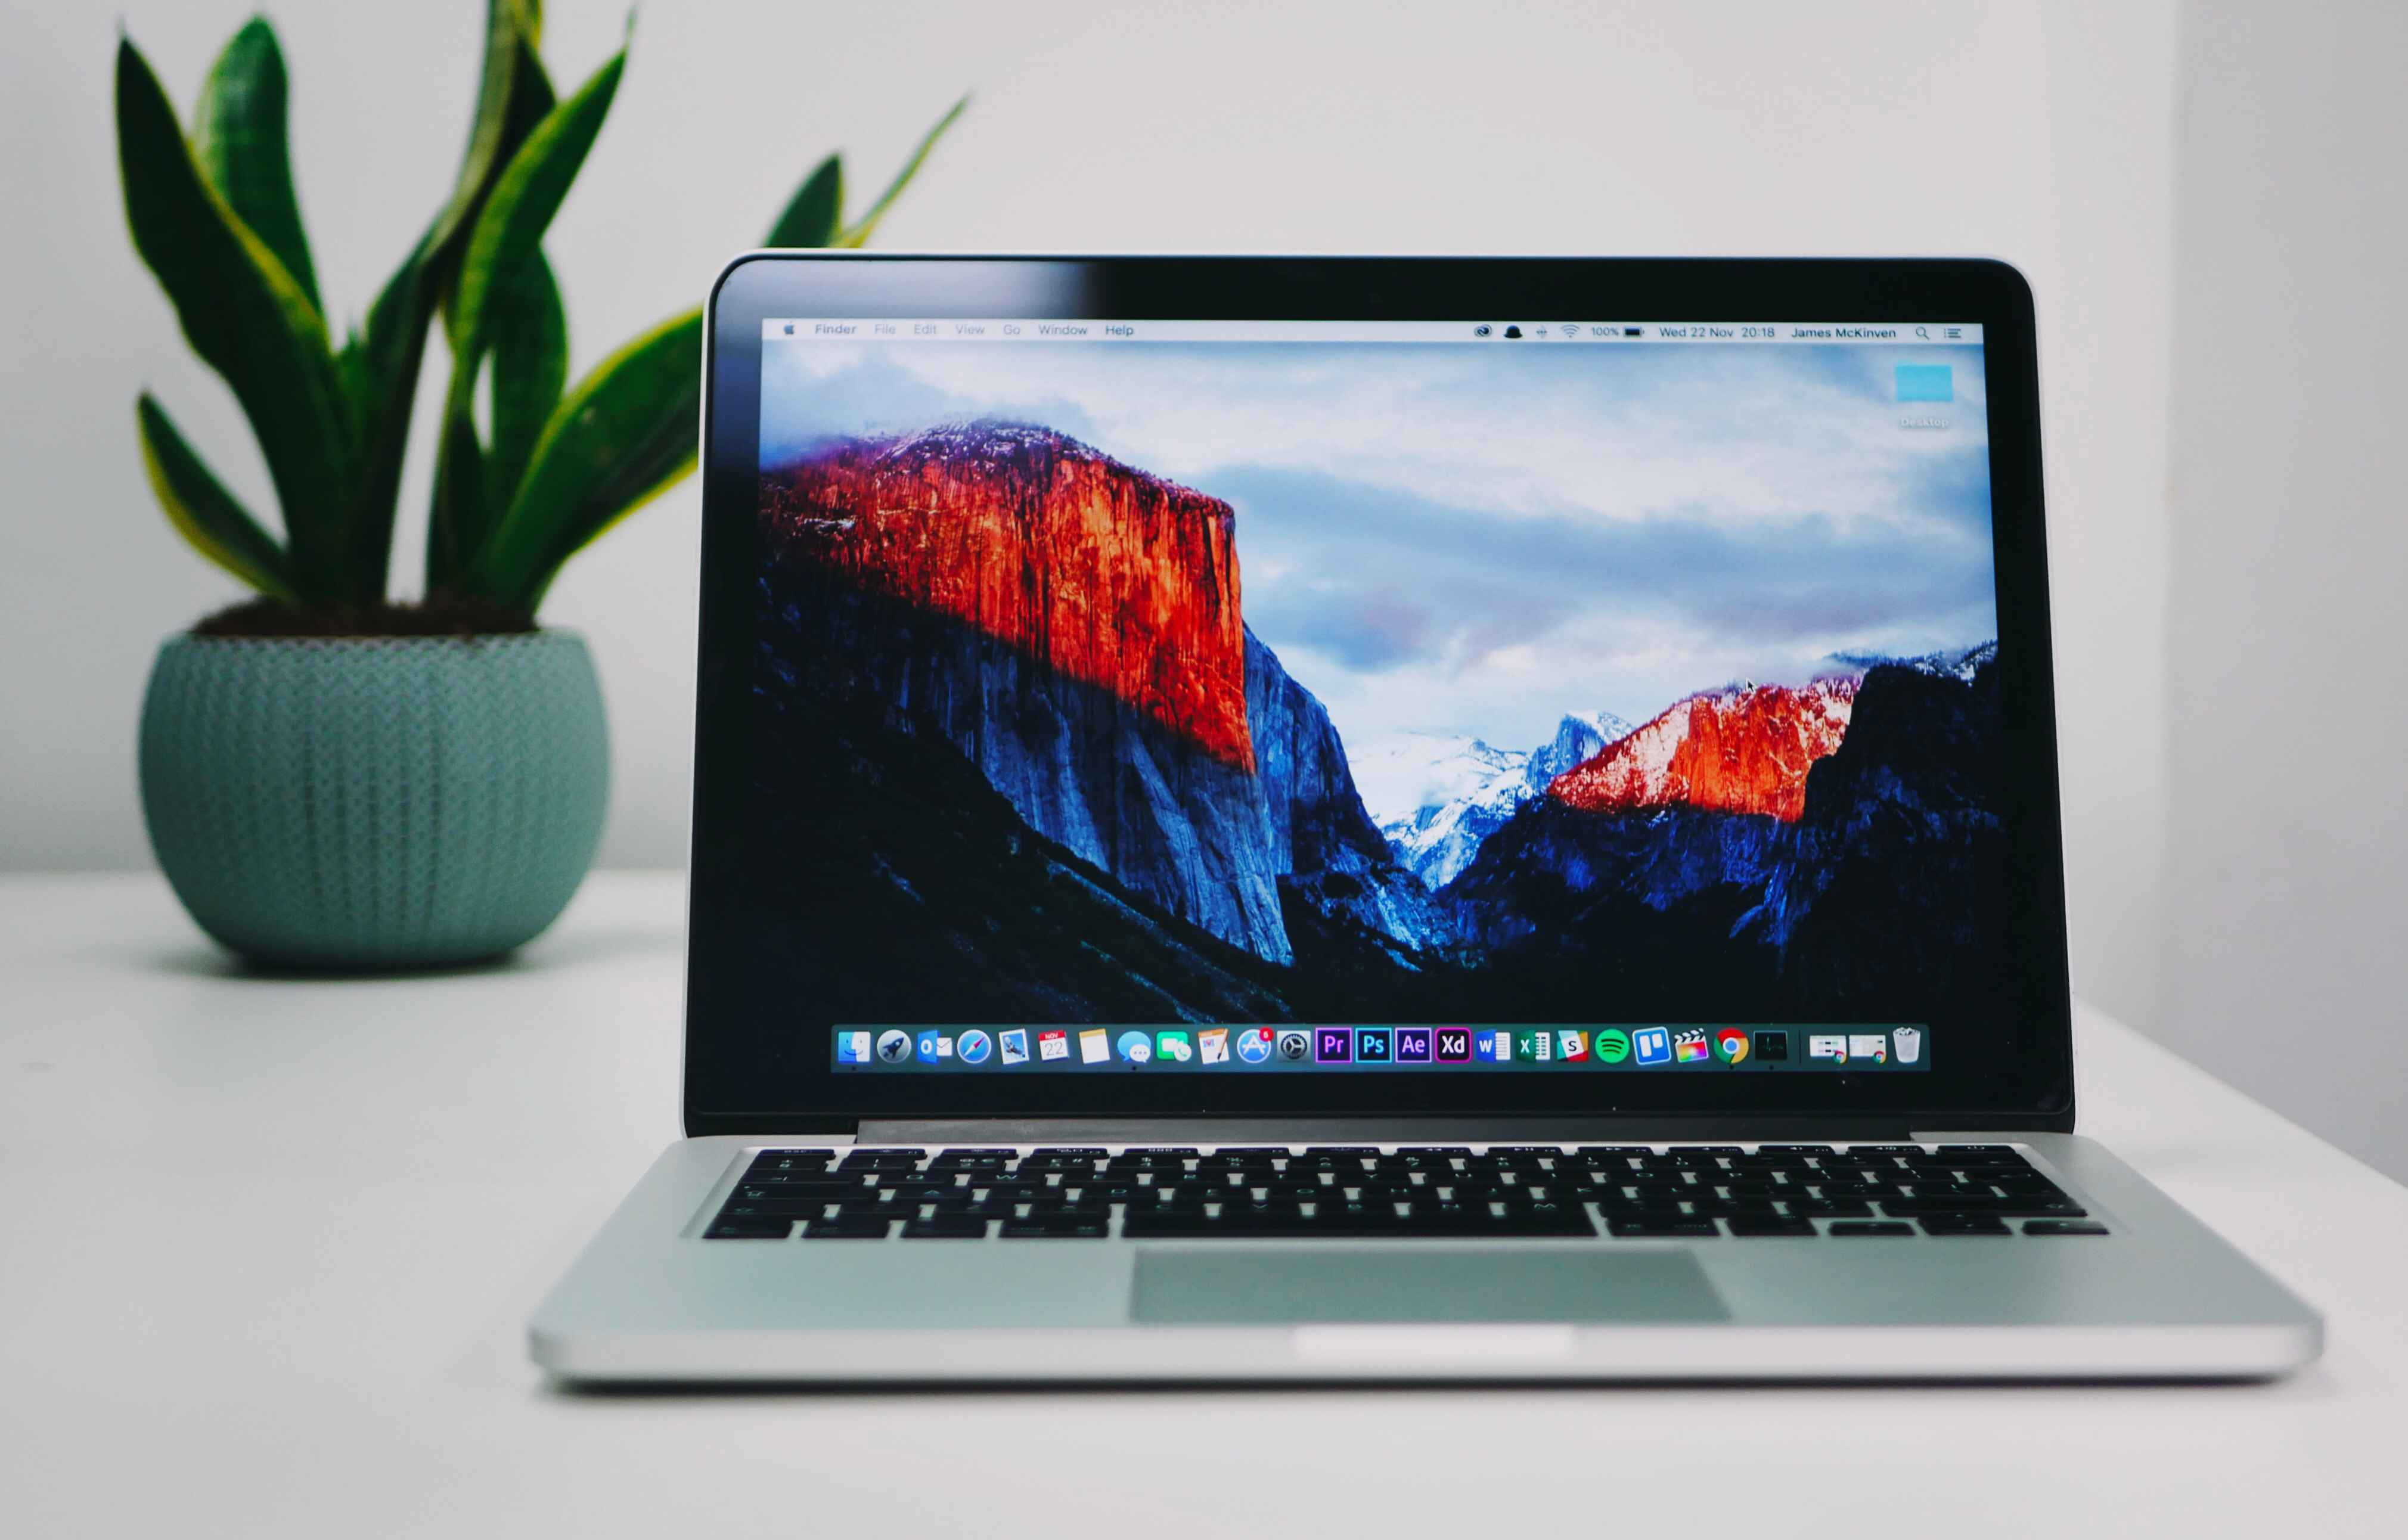 5 Proven Ways to Fix Wi-Fi Problems on Your Macbook: A Step-by-Step Guide